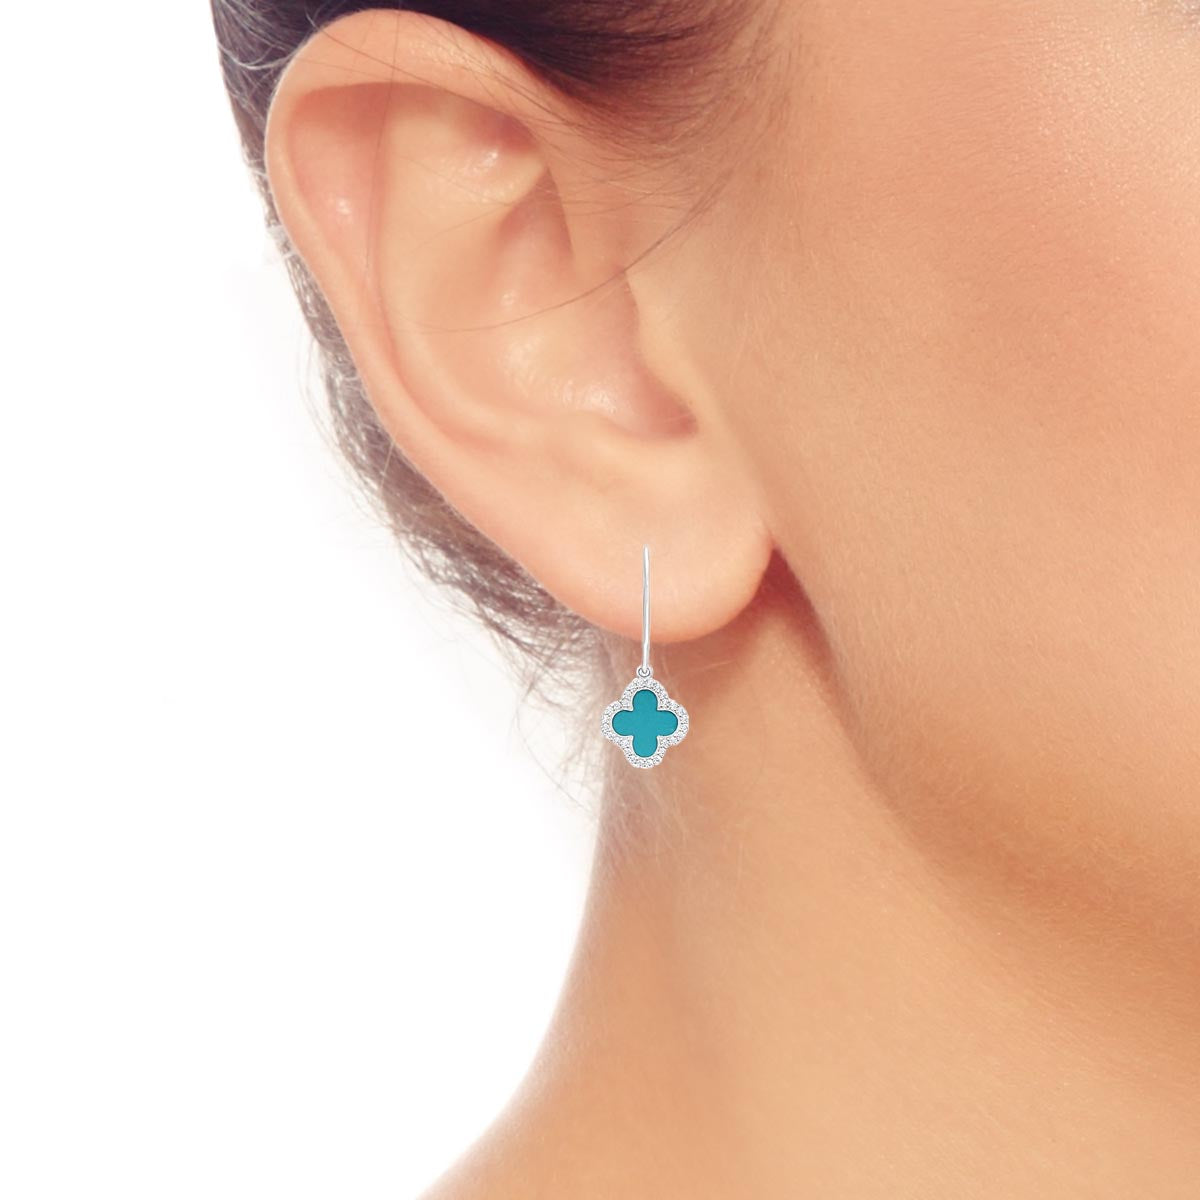 Cubic Zirconia and Turquoise Enamel Clover Earring in Sterling Silver